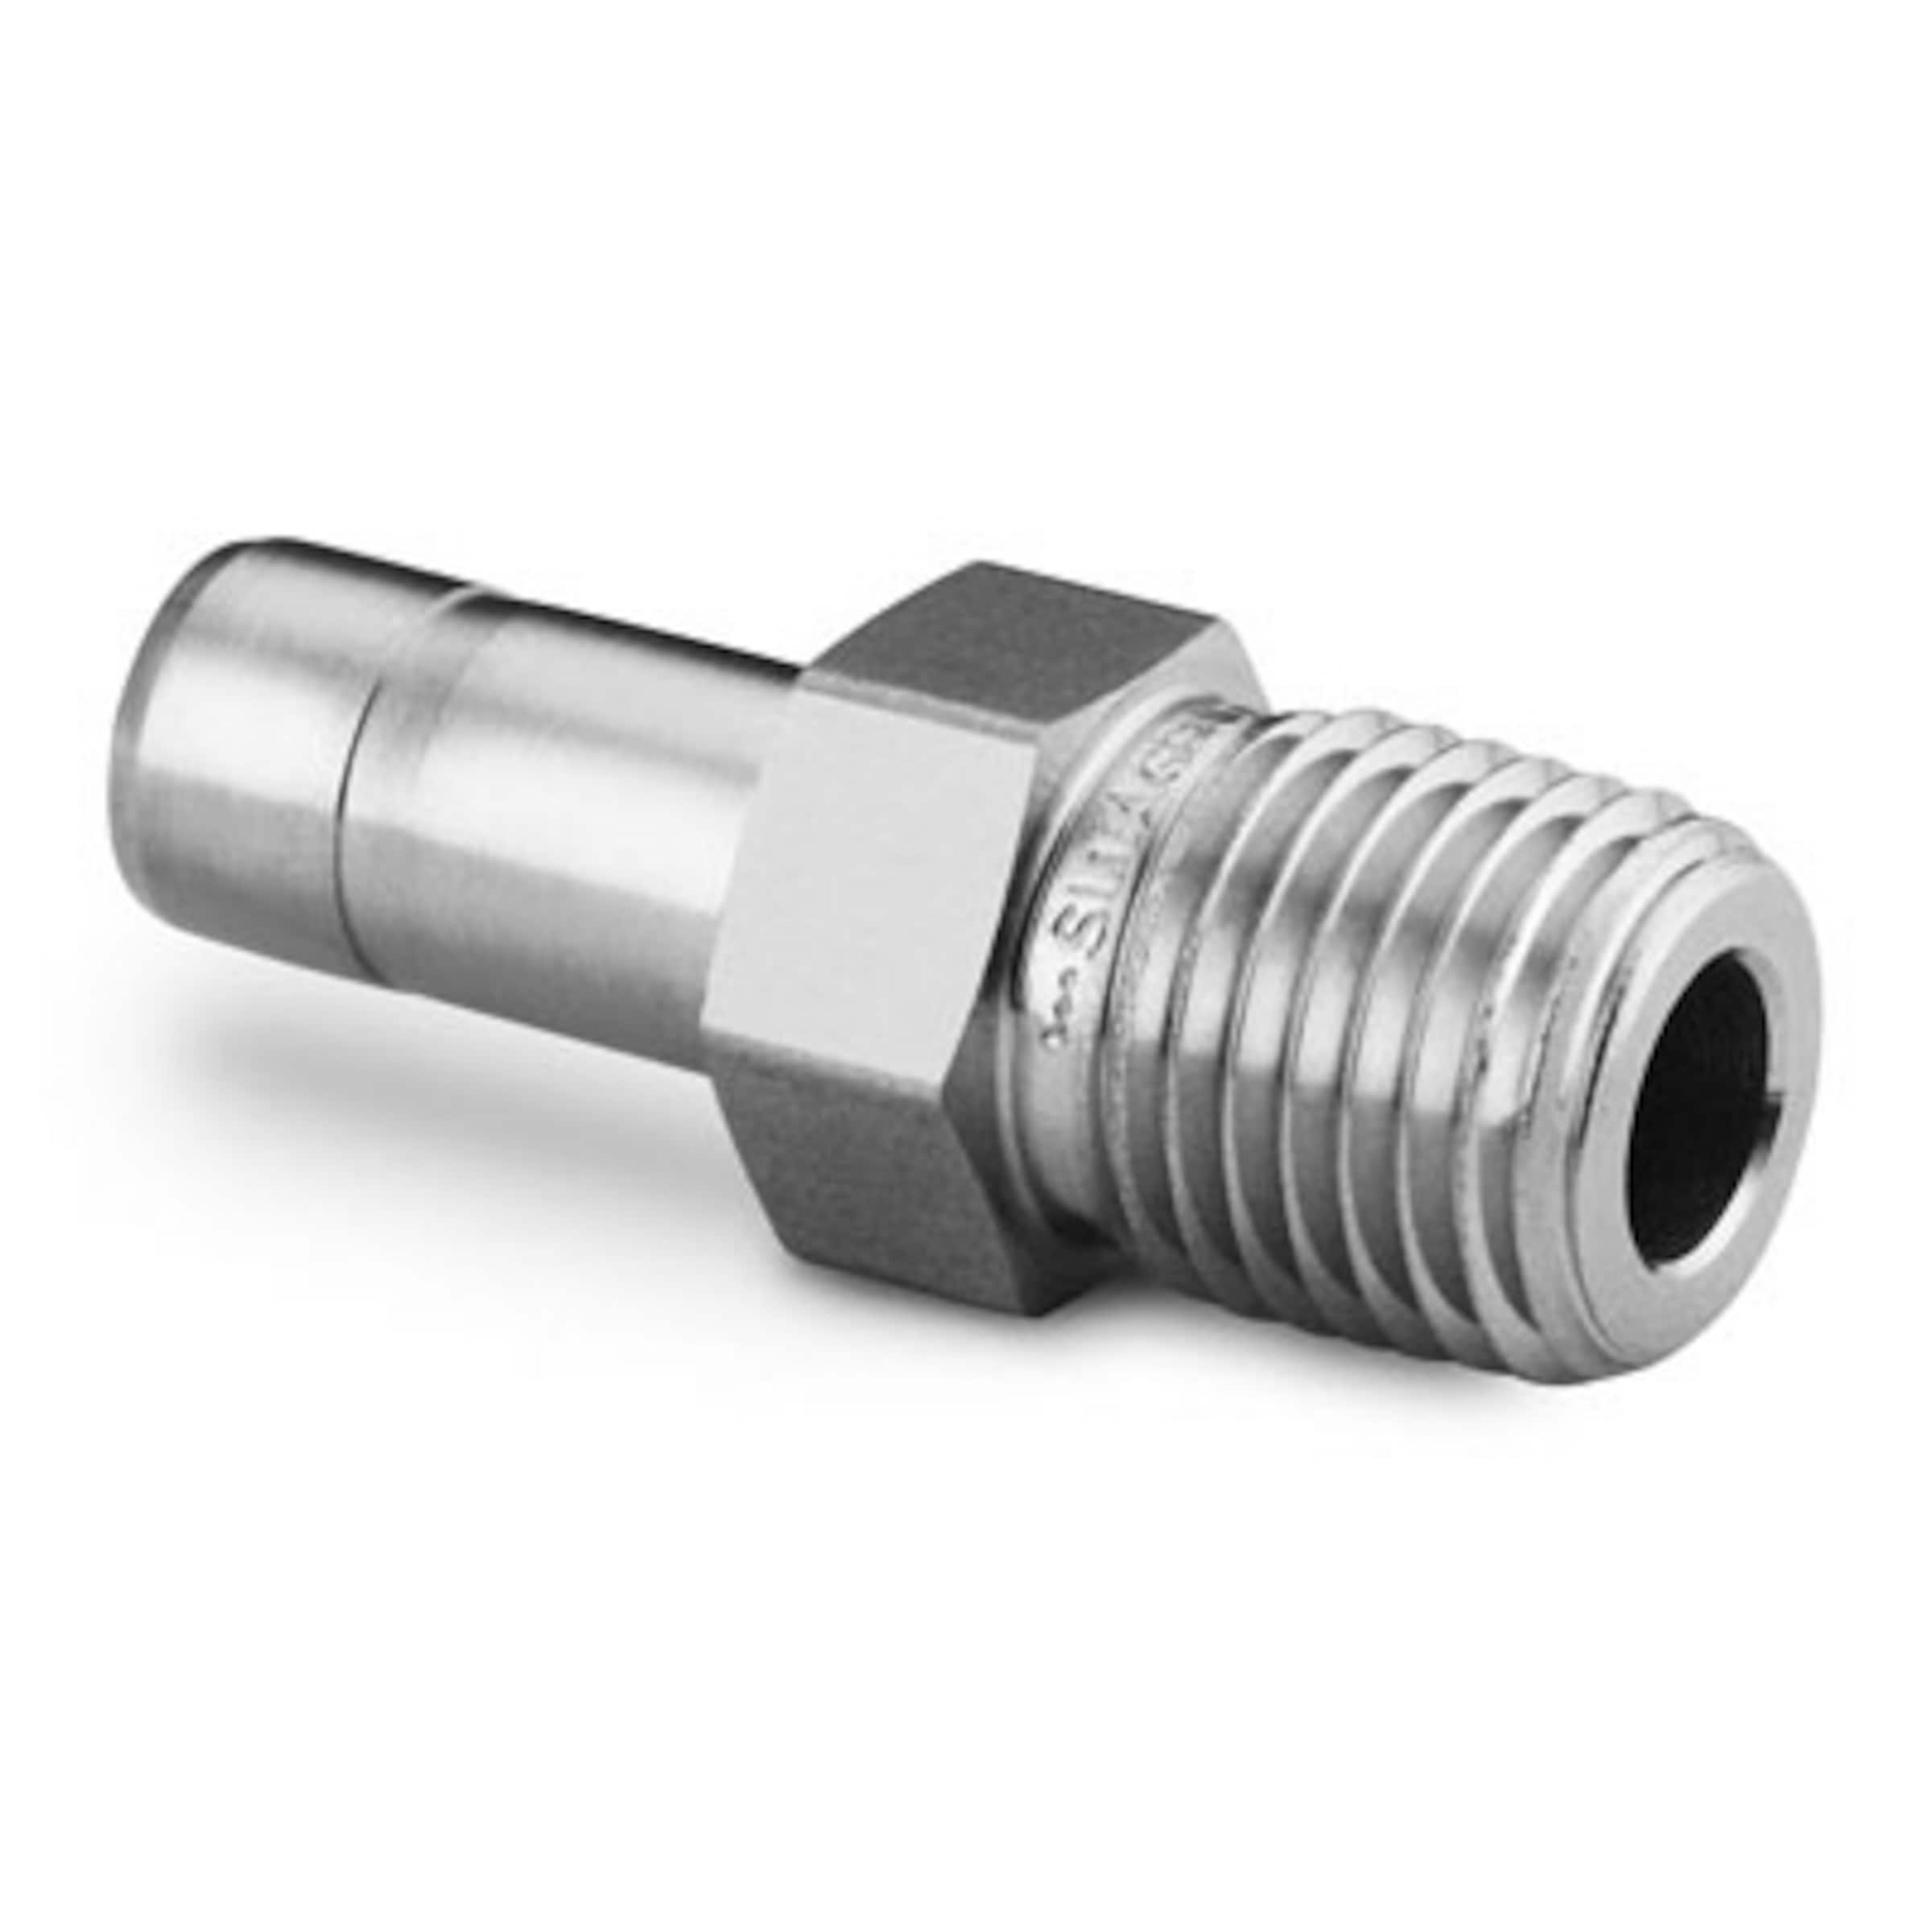 1/2 inch Threaded GI End Cap, For Plumbing Pipe, Elbow at Rs 32